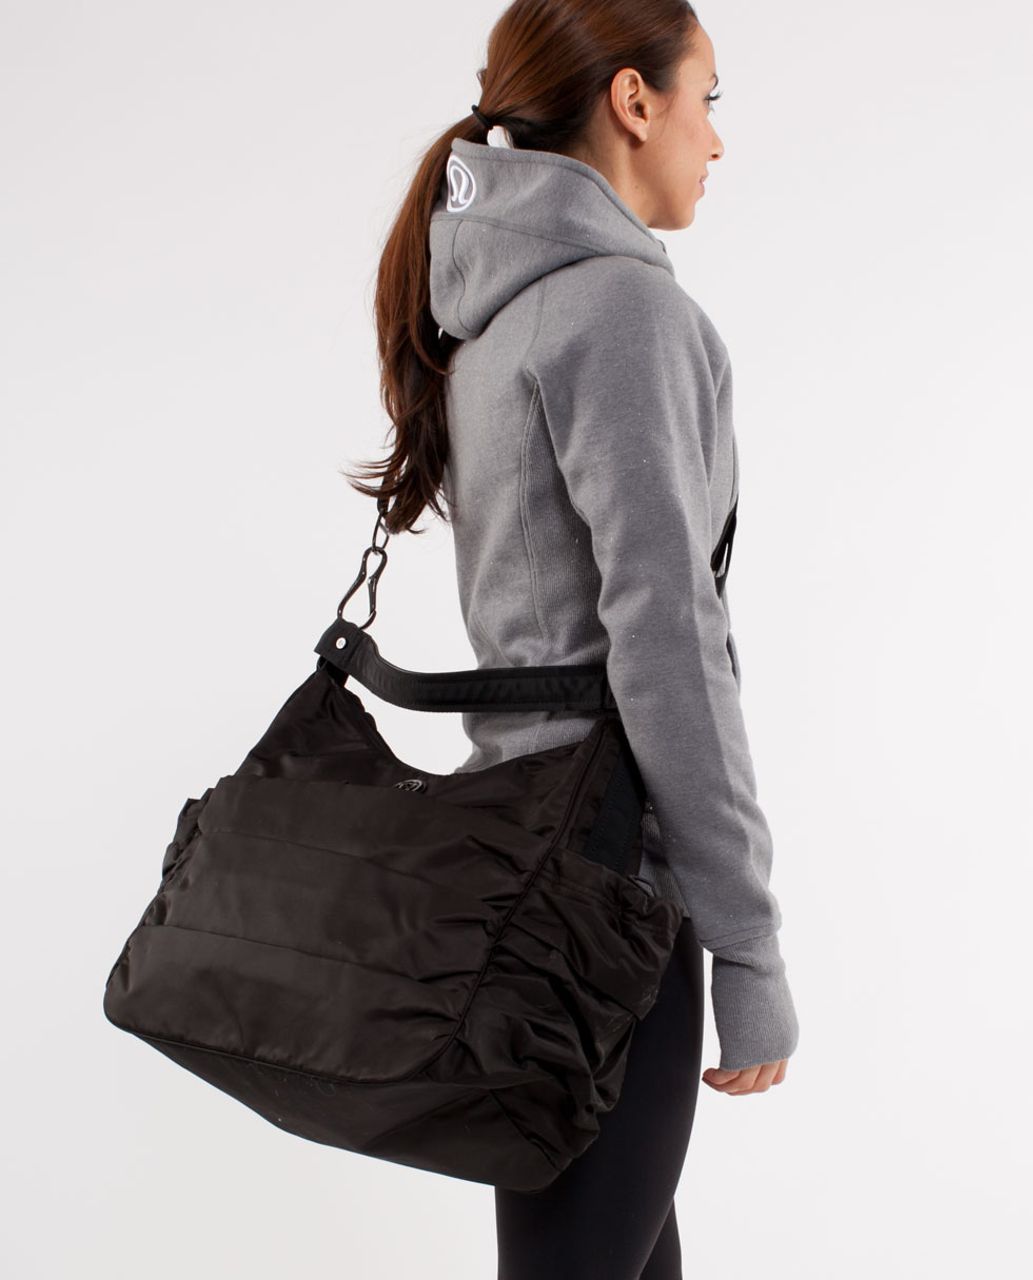 The Top 5 Must Have Gym Bags … – Fit Chic